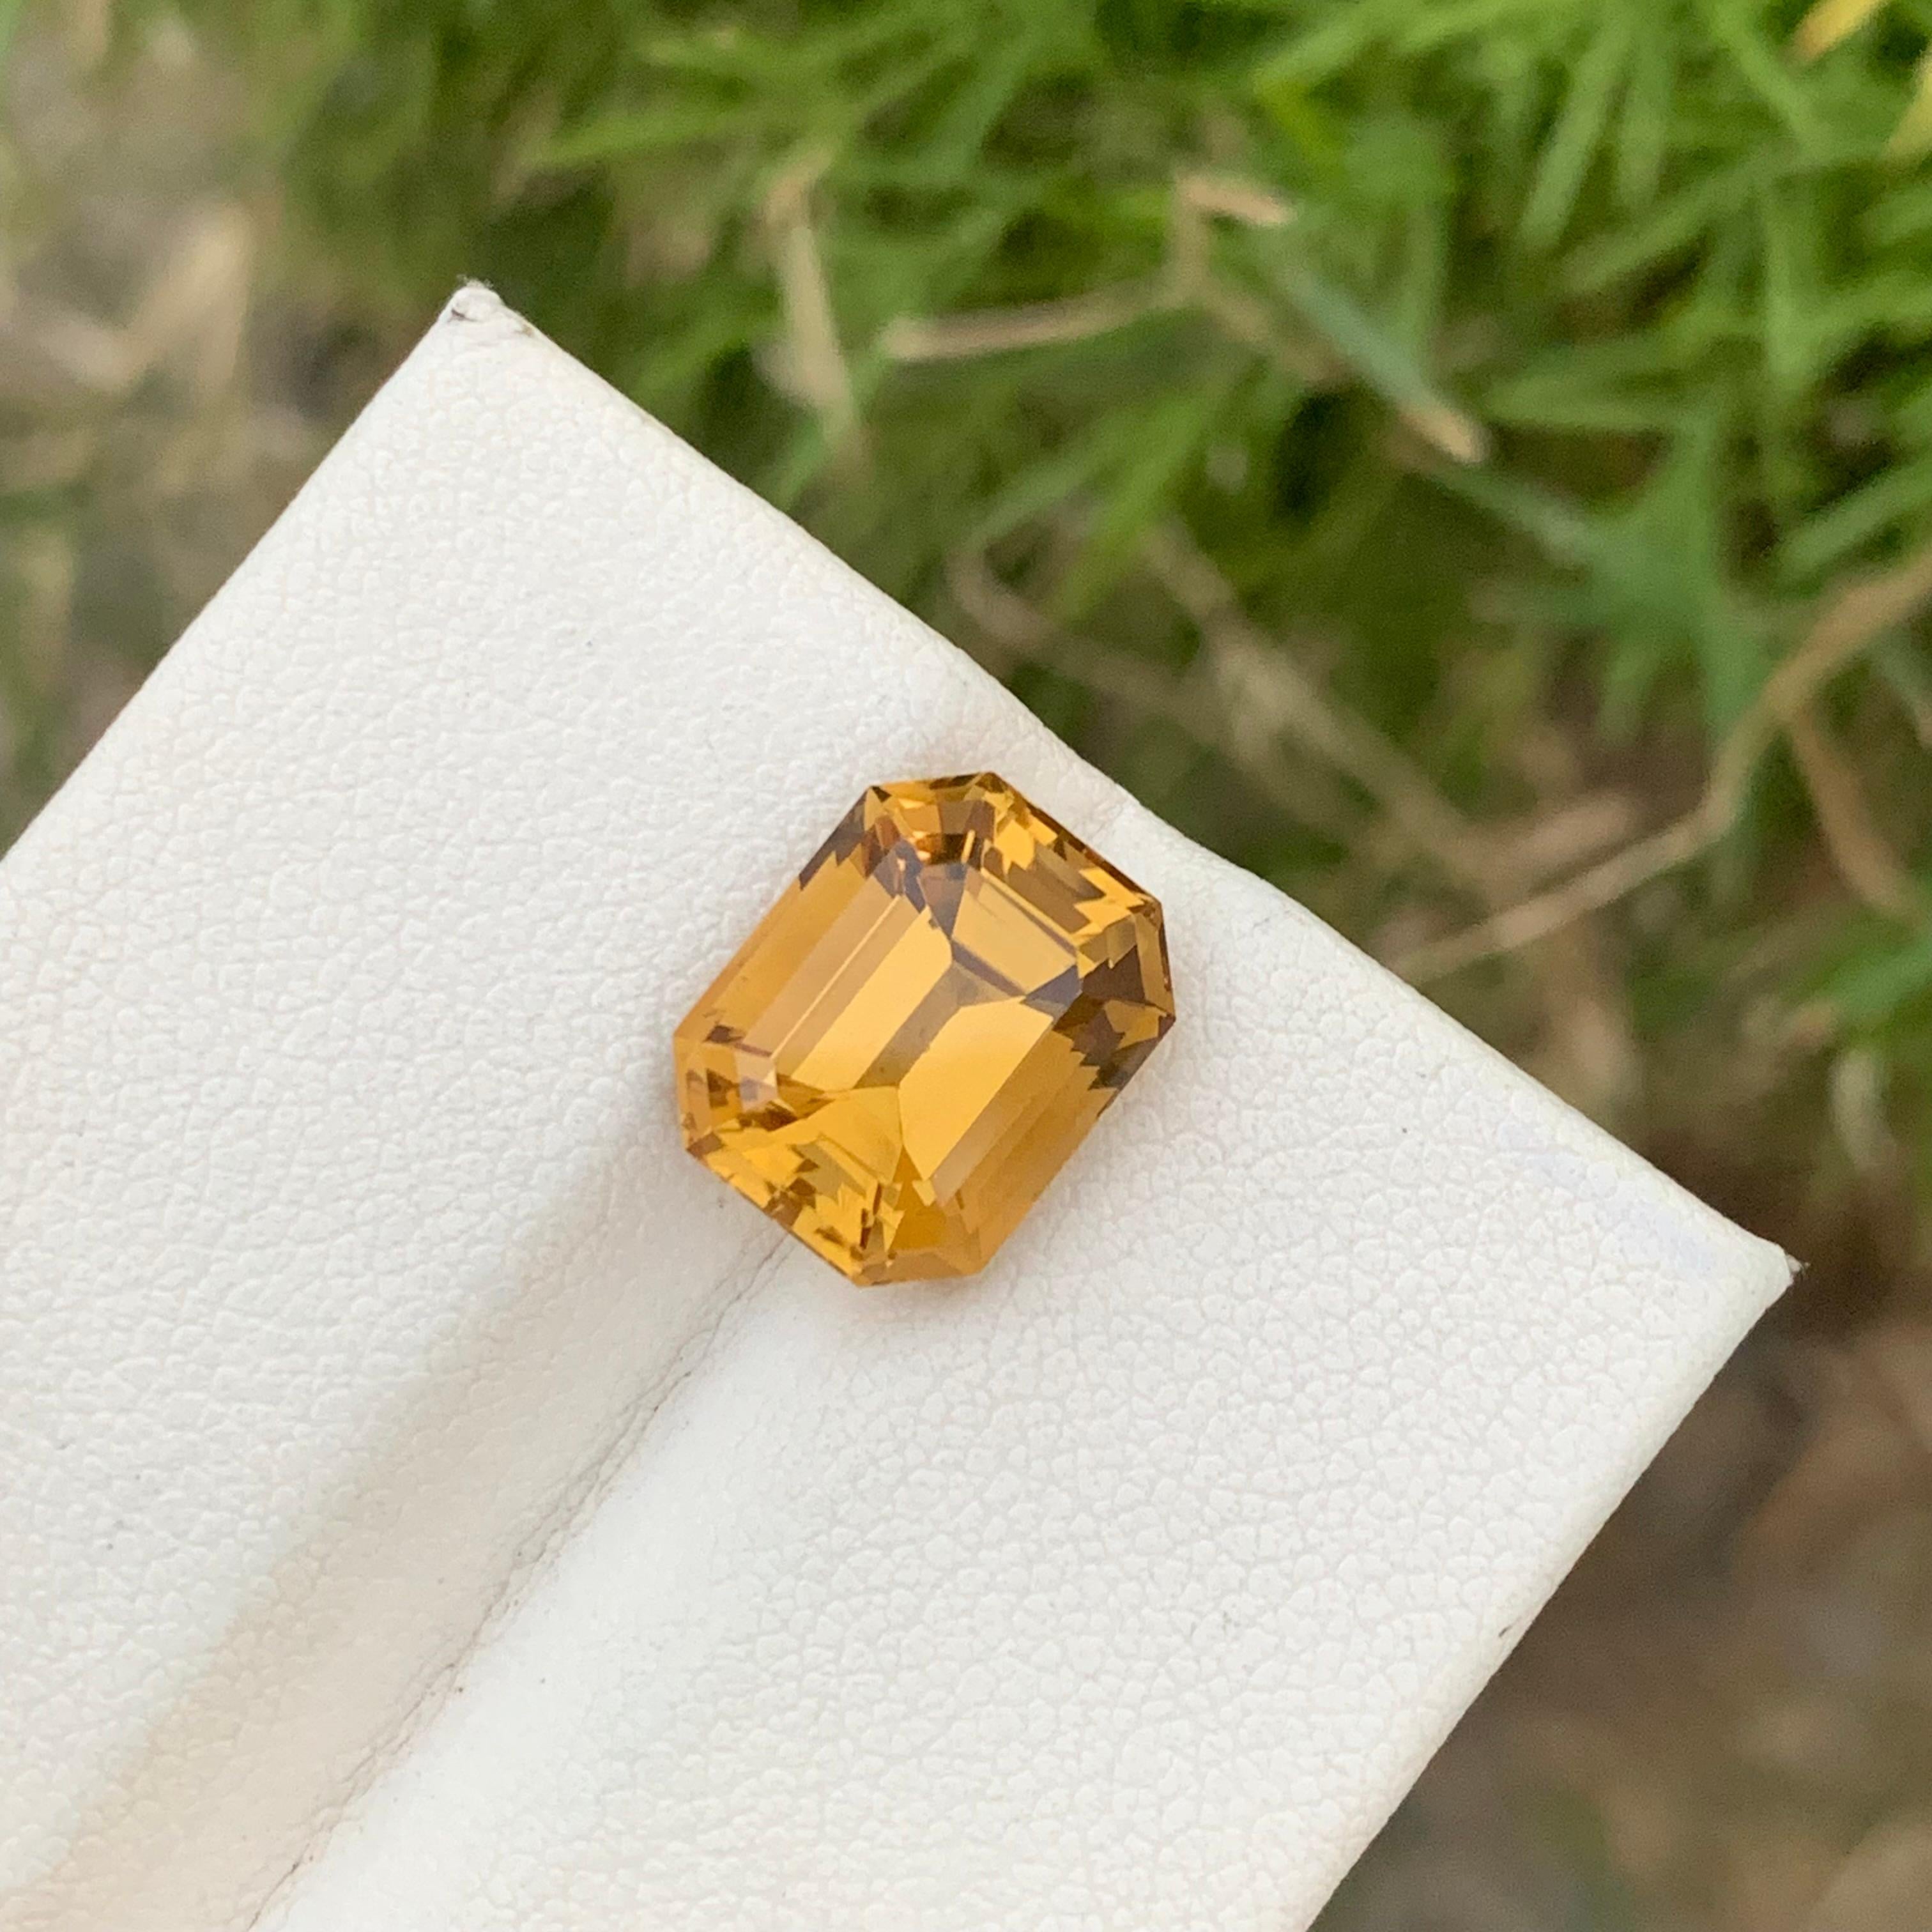 Loose Citrine 
Weight: 5.75 Carats 
Dimension: 12x9.5x7.6 Mm
Origin: Brazil
Shape: Emerald 
Color: Yellow 
Treatment: Non
Certificate: On Demand 
Citrine is a vibrant and sunny gemstone celebrated for its warm, golden-yellow to orange hues. This